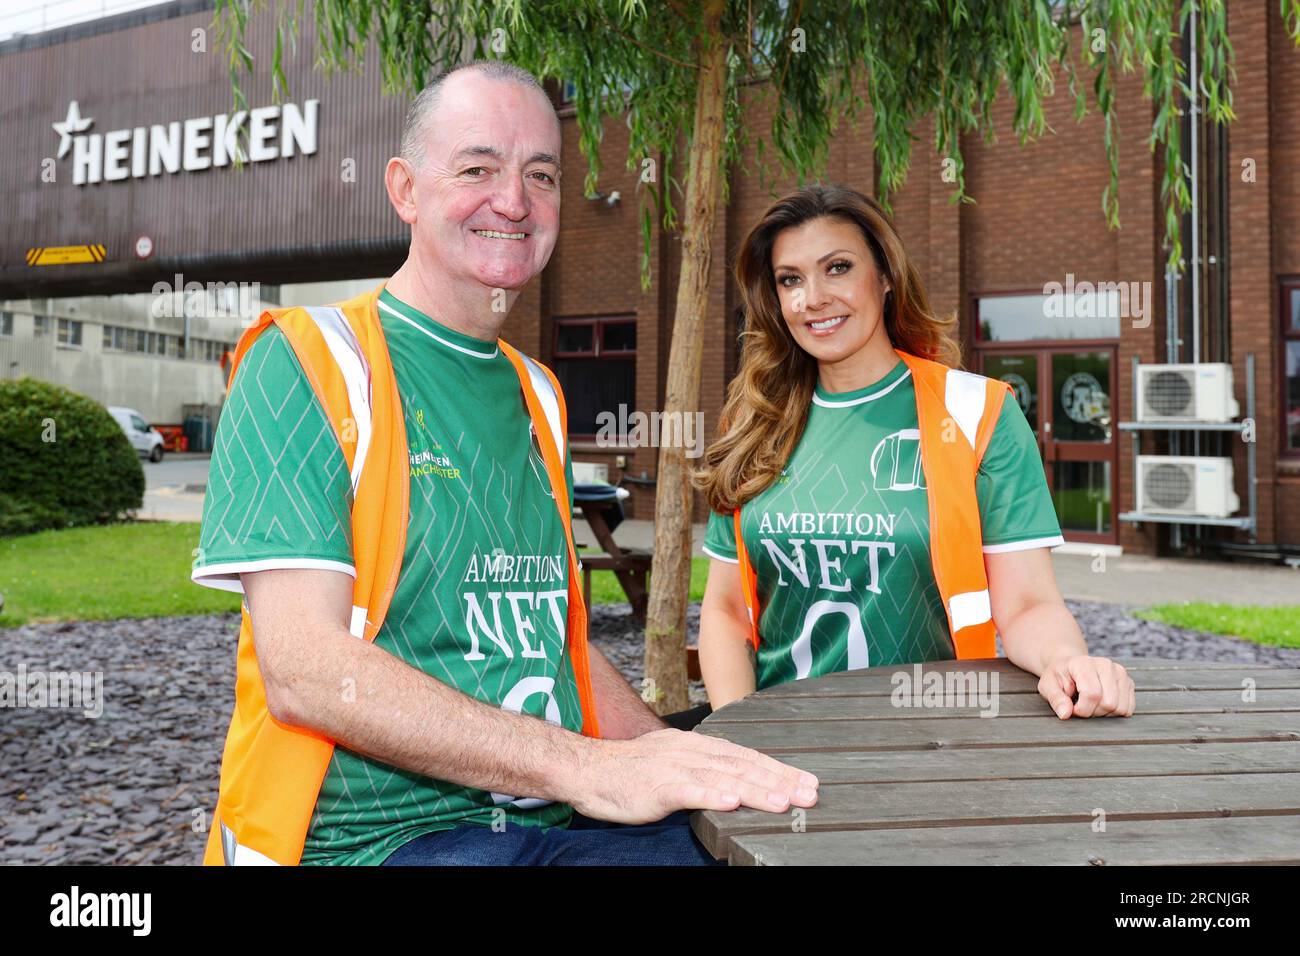 EDITORIAL USE ONLY Manchester United fan, Kym Marsh and Manchester City fan, Craig Cash put their differences aside and don green shirts during a tour of HEINEKEN UK's flagship Manchester brewery to celebrate a £25m investment into the brewery in support of the company's global net zero 2030 ambitions. Issue date: Sunday July 16, 2023. Stock Photo